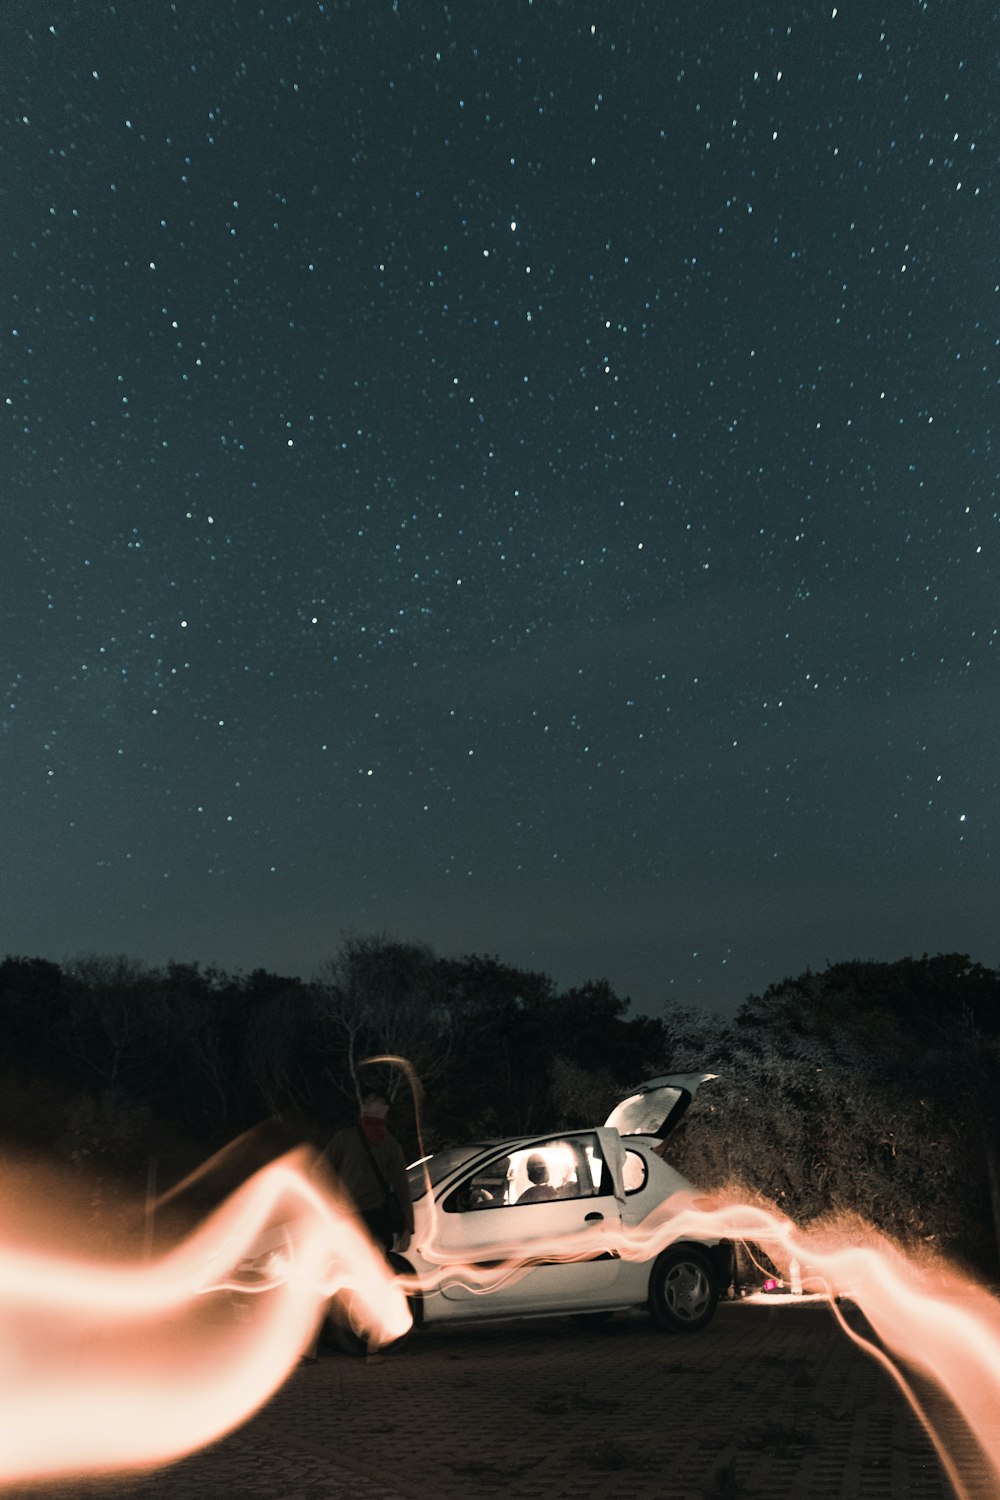 a person holding a car in the air with a starry sky above